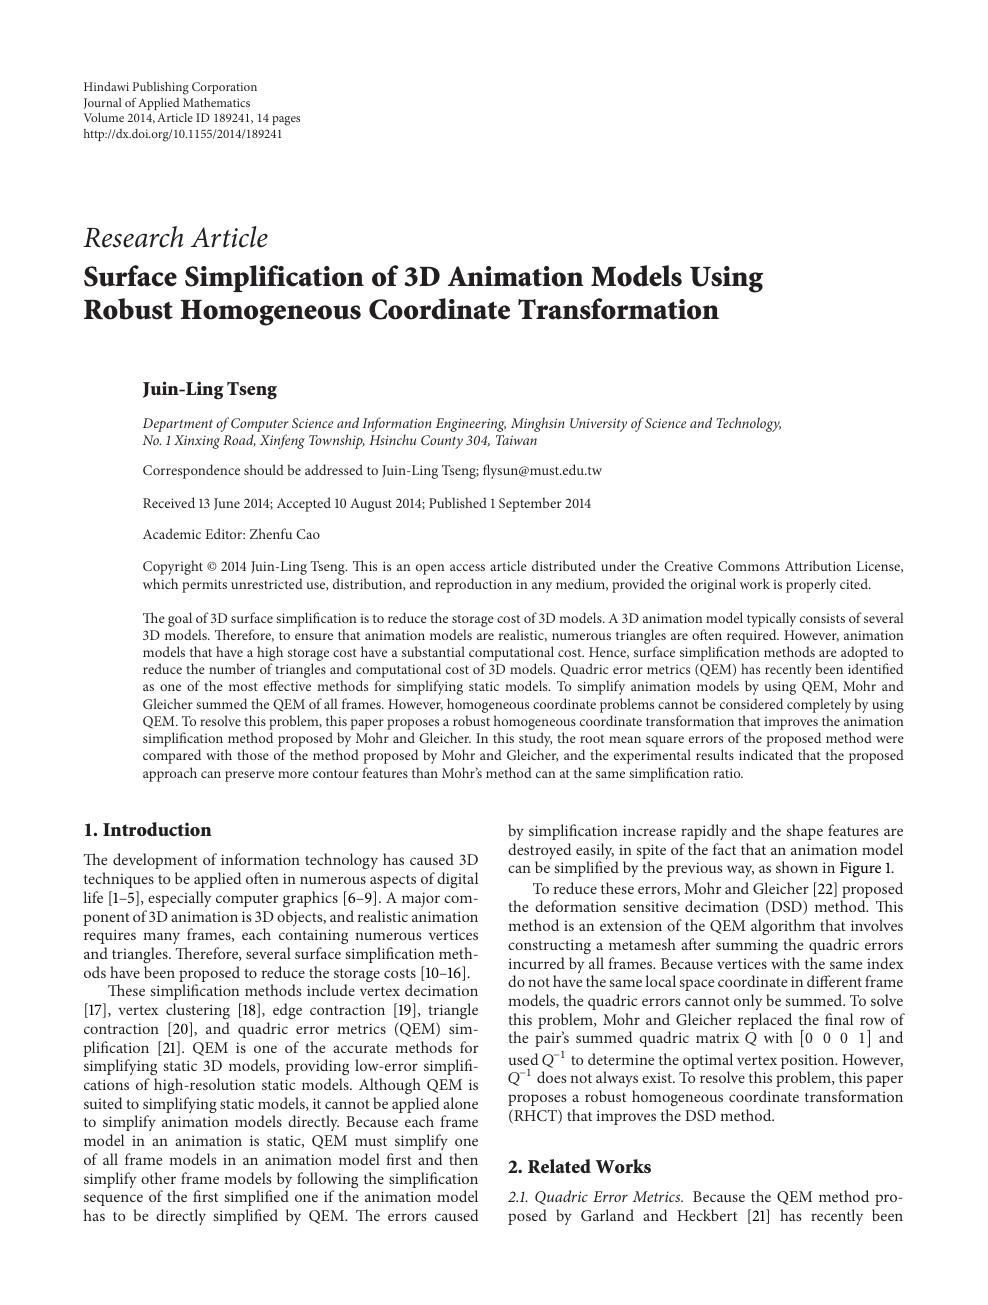 Surface Simplification of 3D Animation Models Using Robust Homogeneous  Coordinate Transformation – topic of research paper in Mechanical  engineering. Download scholarly article PDF and read for free on  CyberLeninka open science hub.